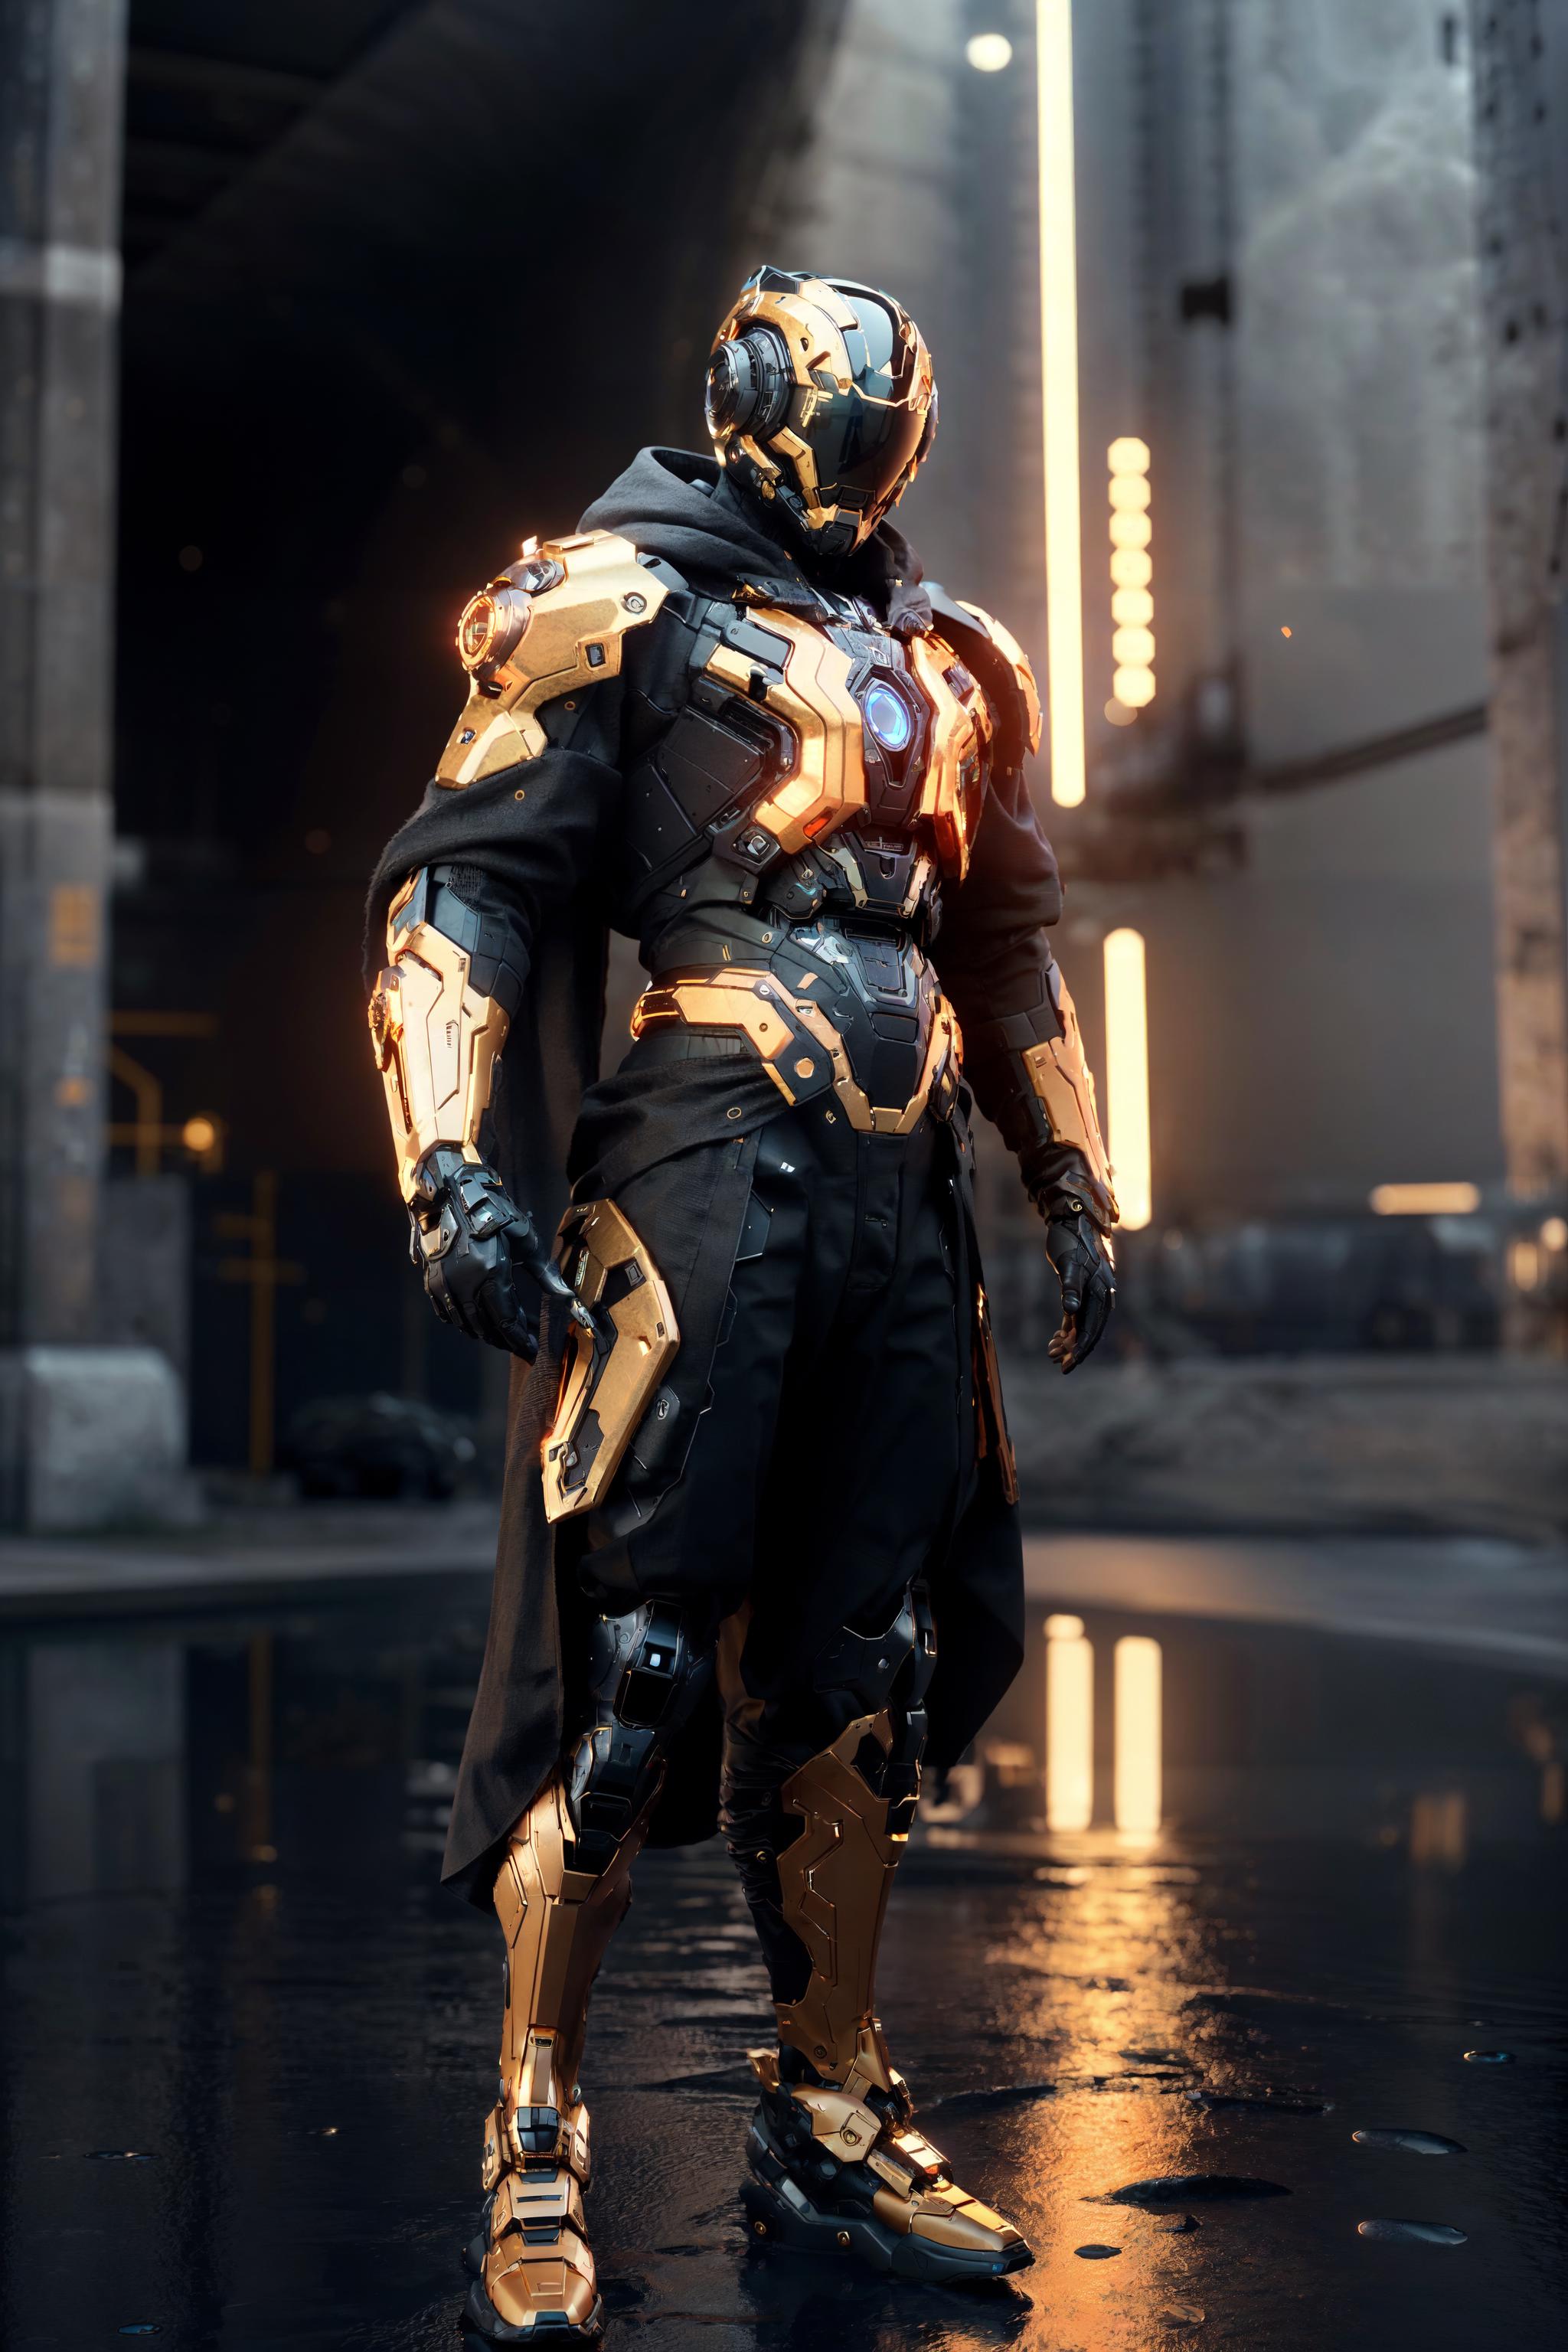 A robotic figure with a cape and gold armor.